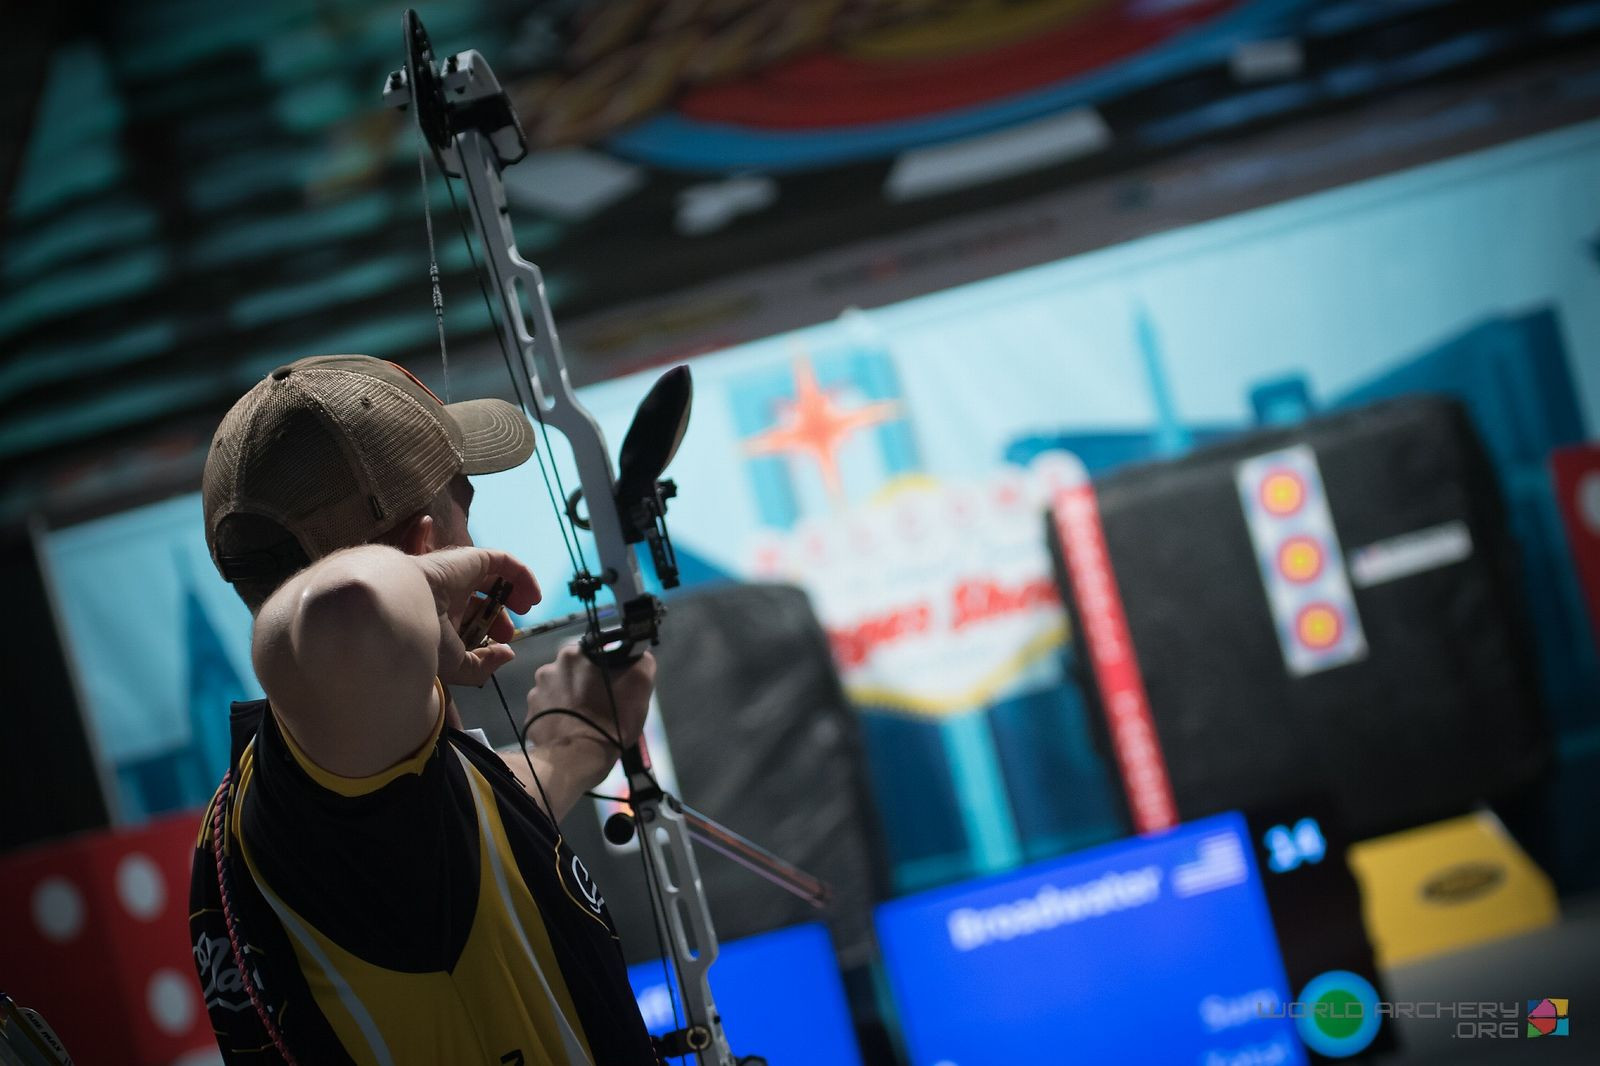 The new World Series event will replace the previous Indoor World Cup ©World Archery